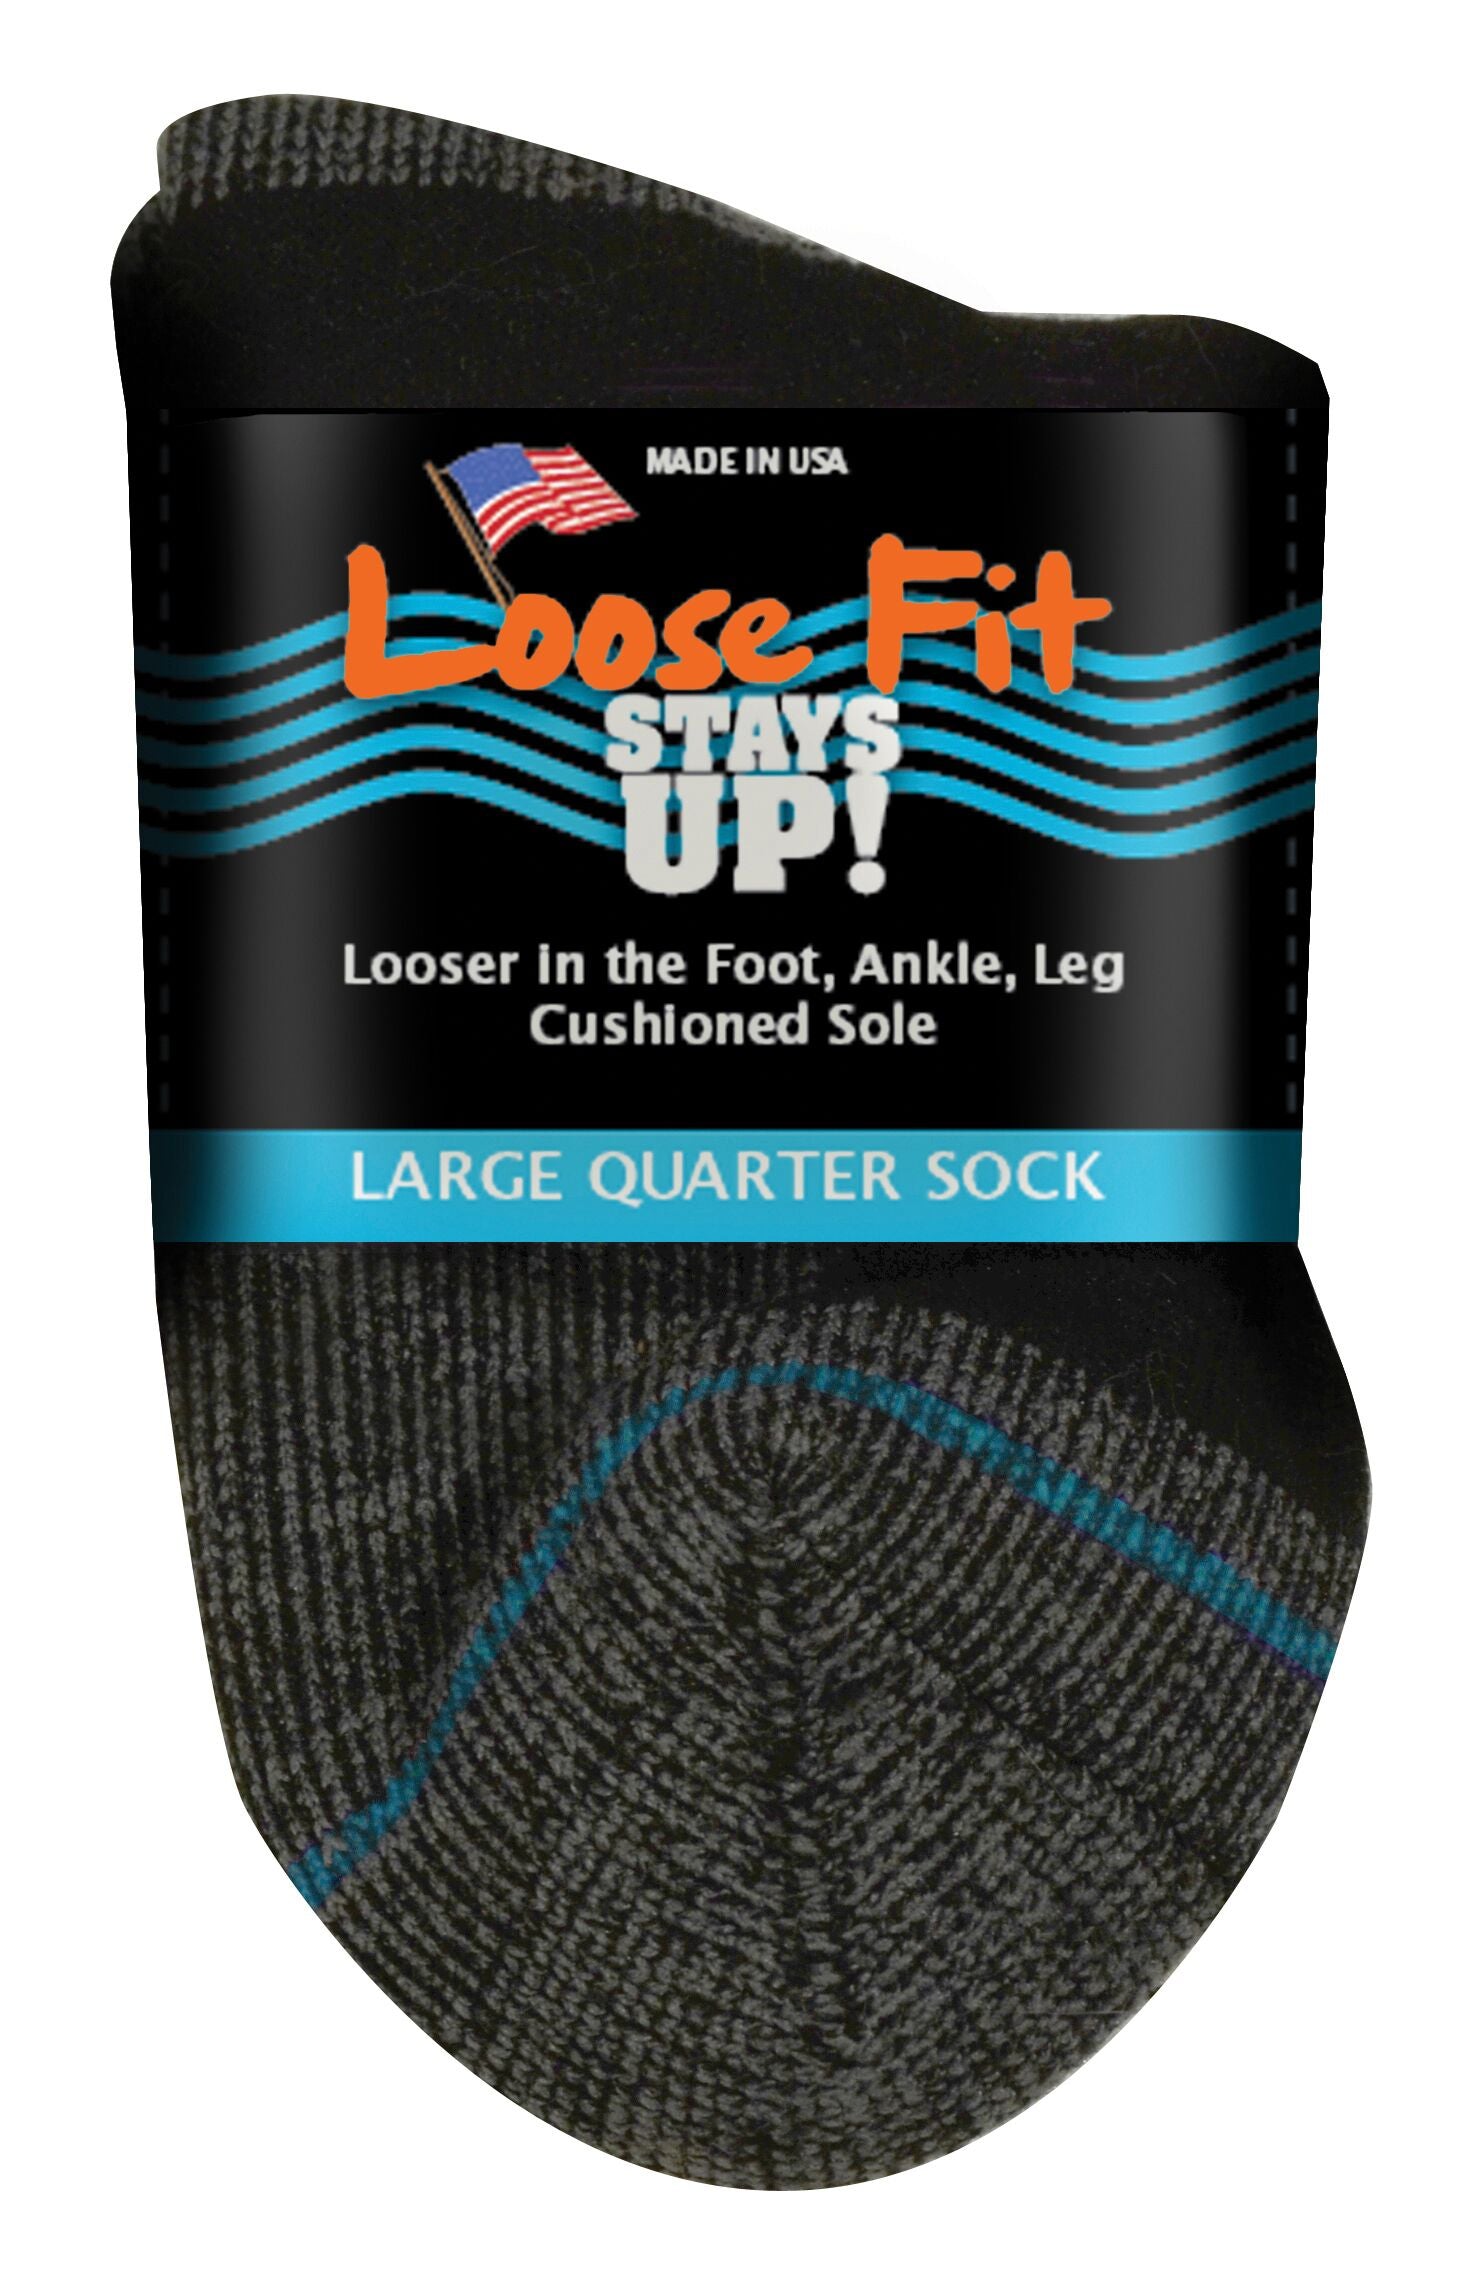 Loose Fit Stays Up Cotton Casual Quarter Socks - 0